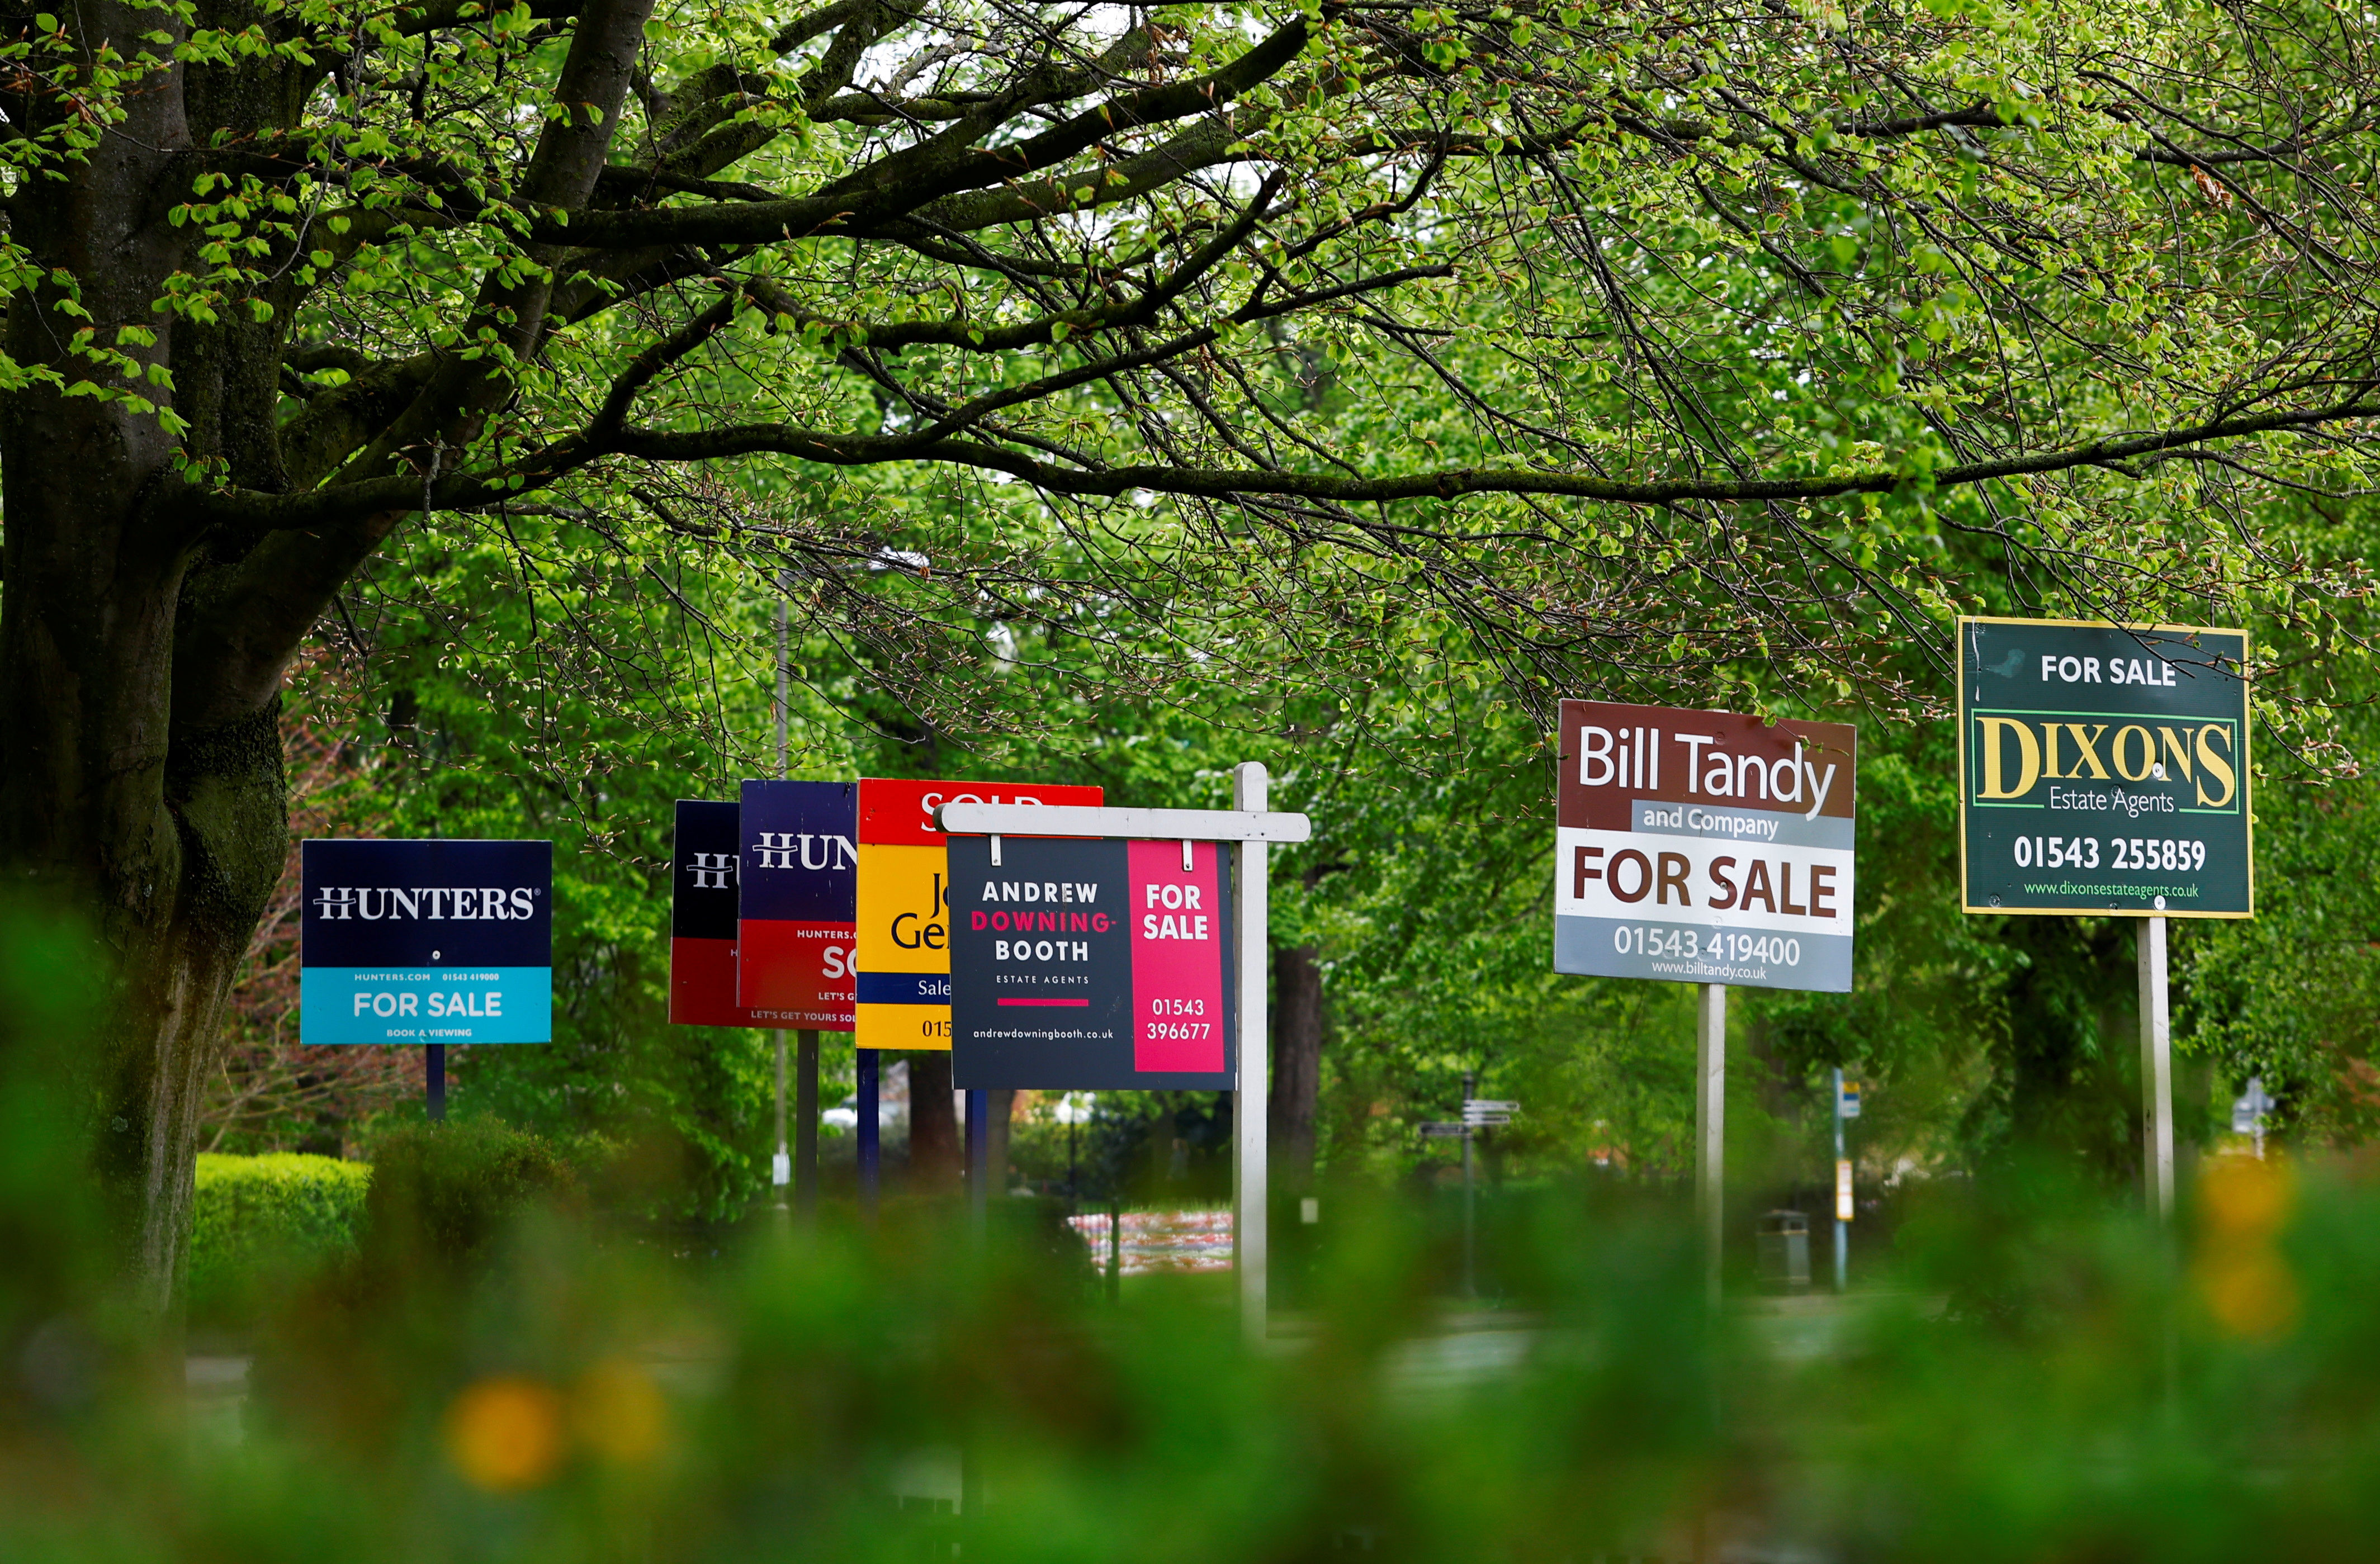 Property estate agent sales and letting signs are seen outside an apartment building